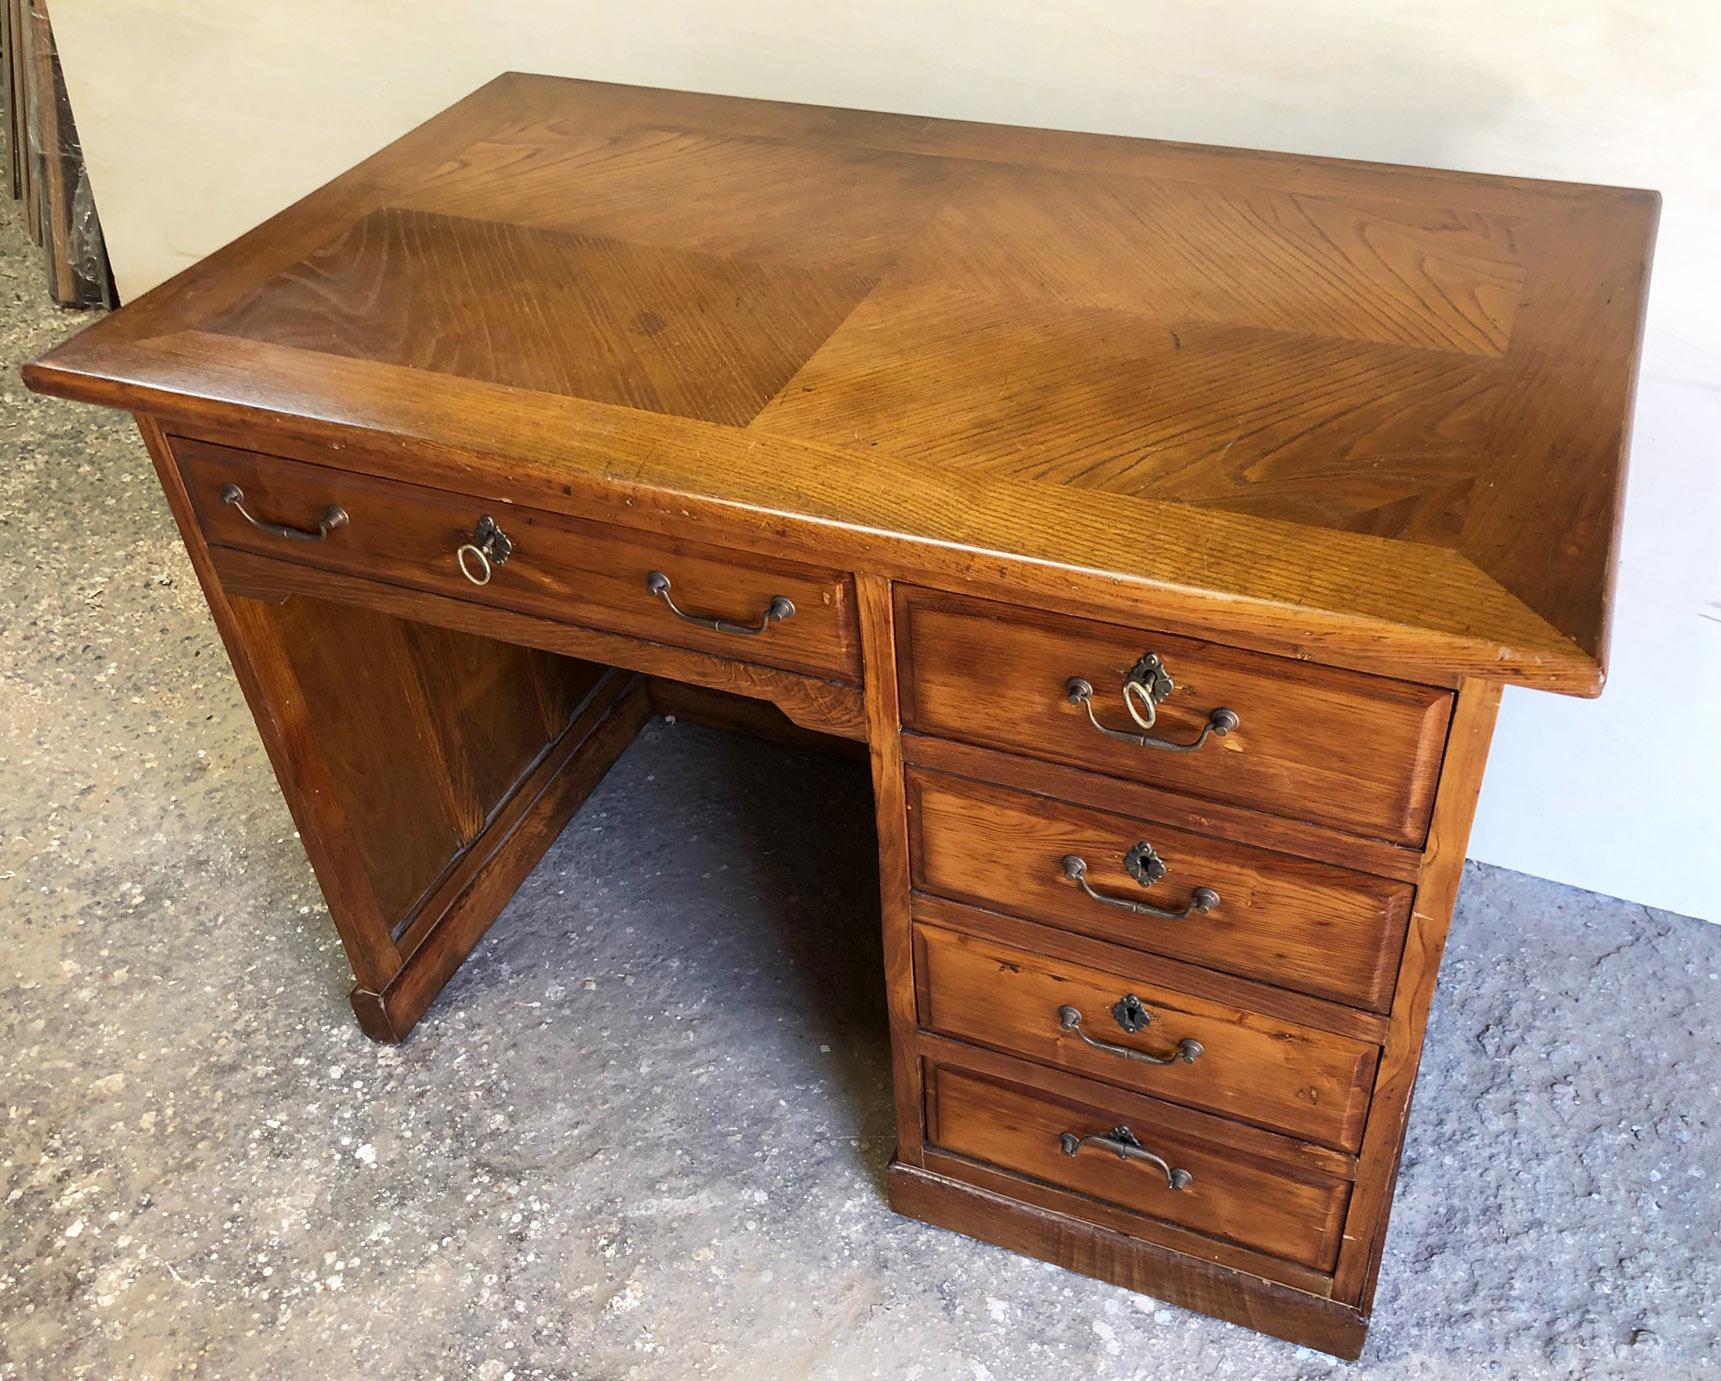 Italian desk, from 1960 in chestnut, honey-colored, with 5 drawers
Nice design with wood in the top
Height for legs from under the drawer 58 cm.
Comes from an old country house in the Lucca area of Tuscany.
As shown in the photographs and videos,